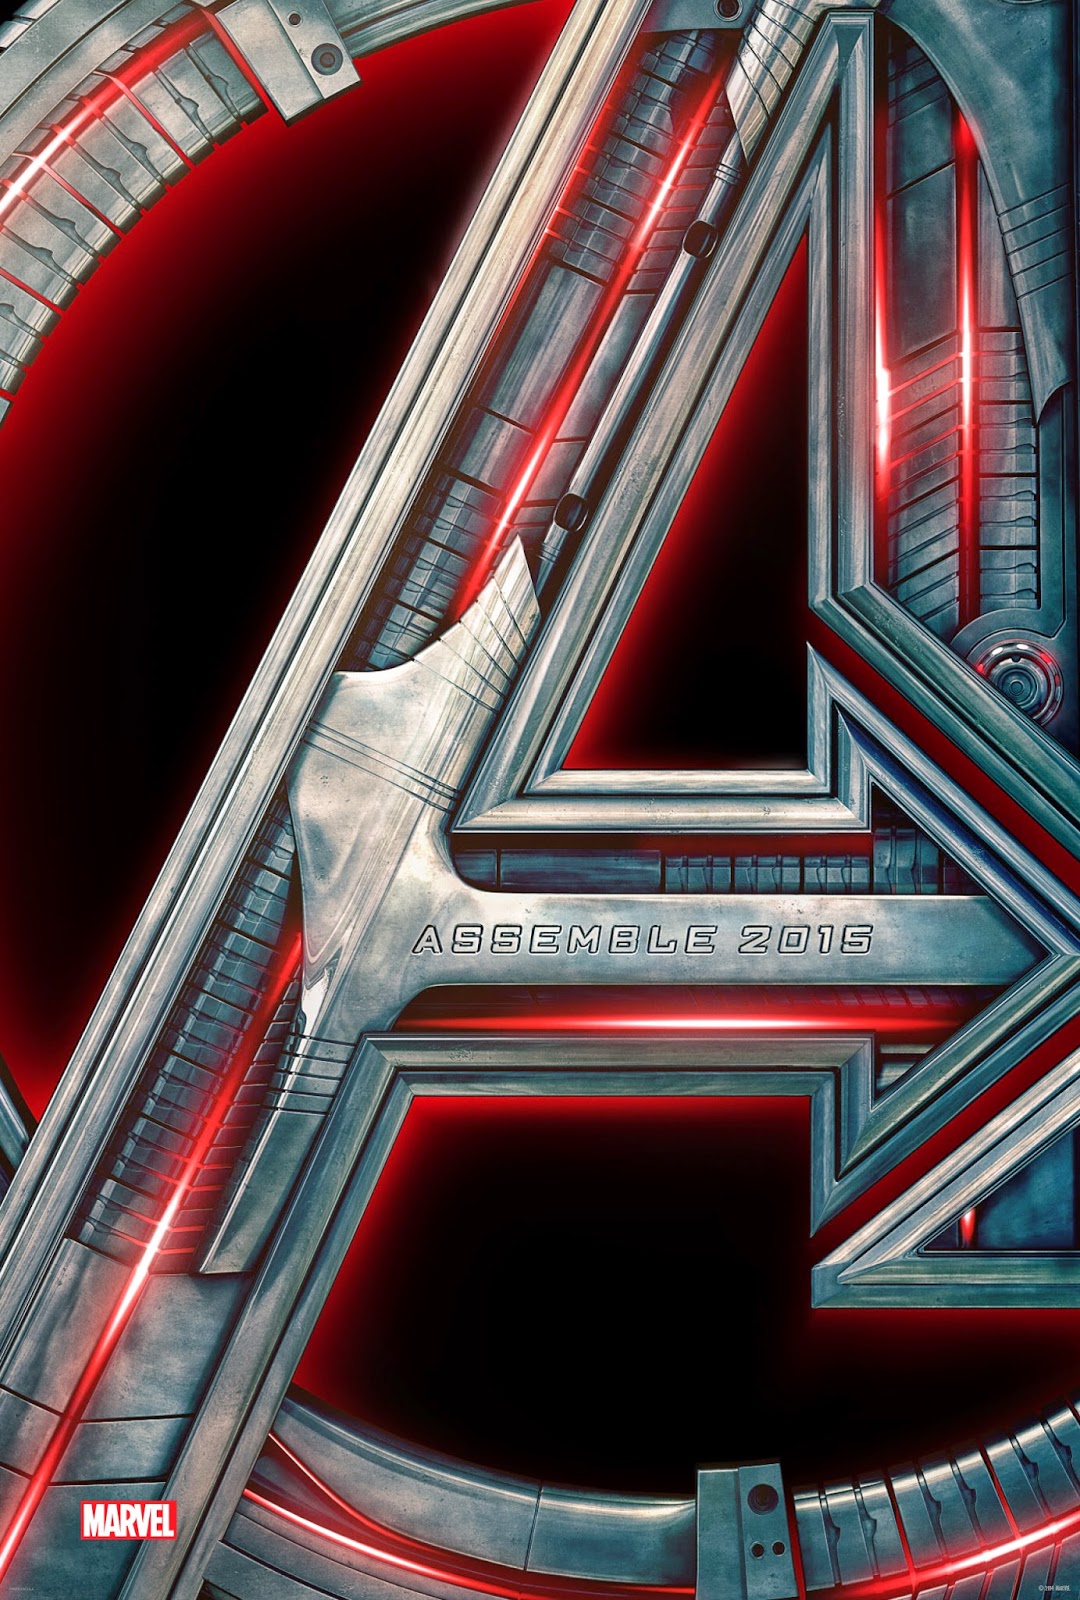 The Avengers:  Age of Ultron Teaser Poster